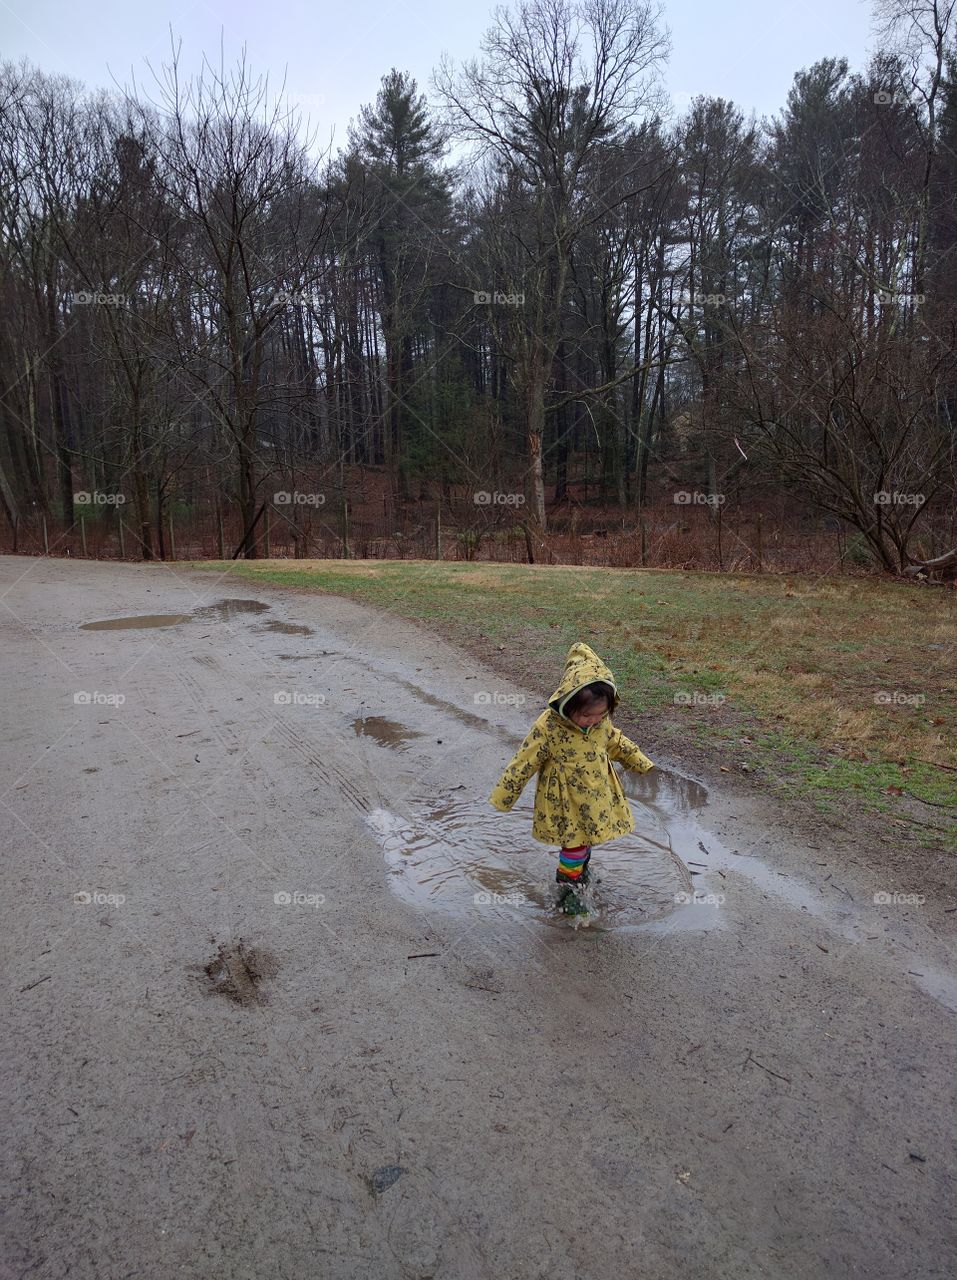 The Puddle Girl